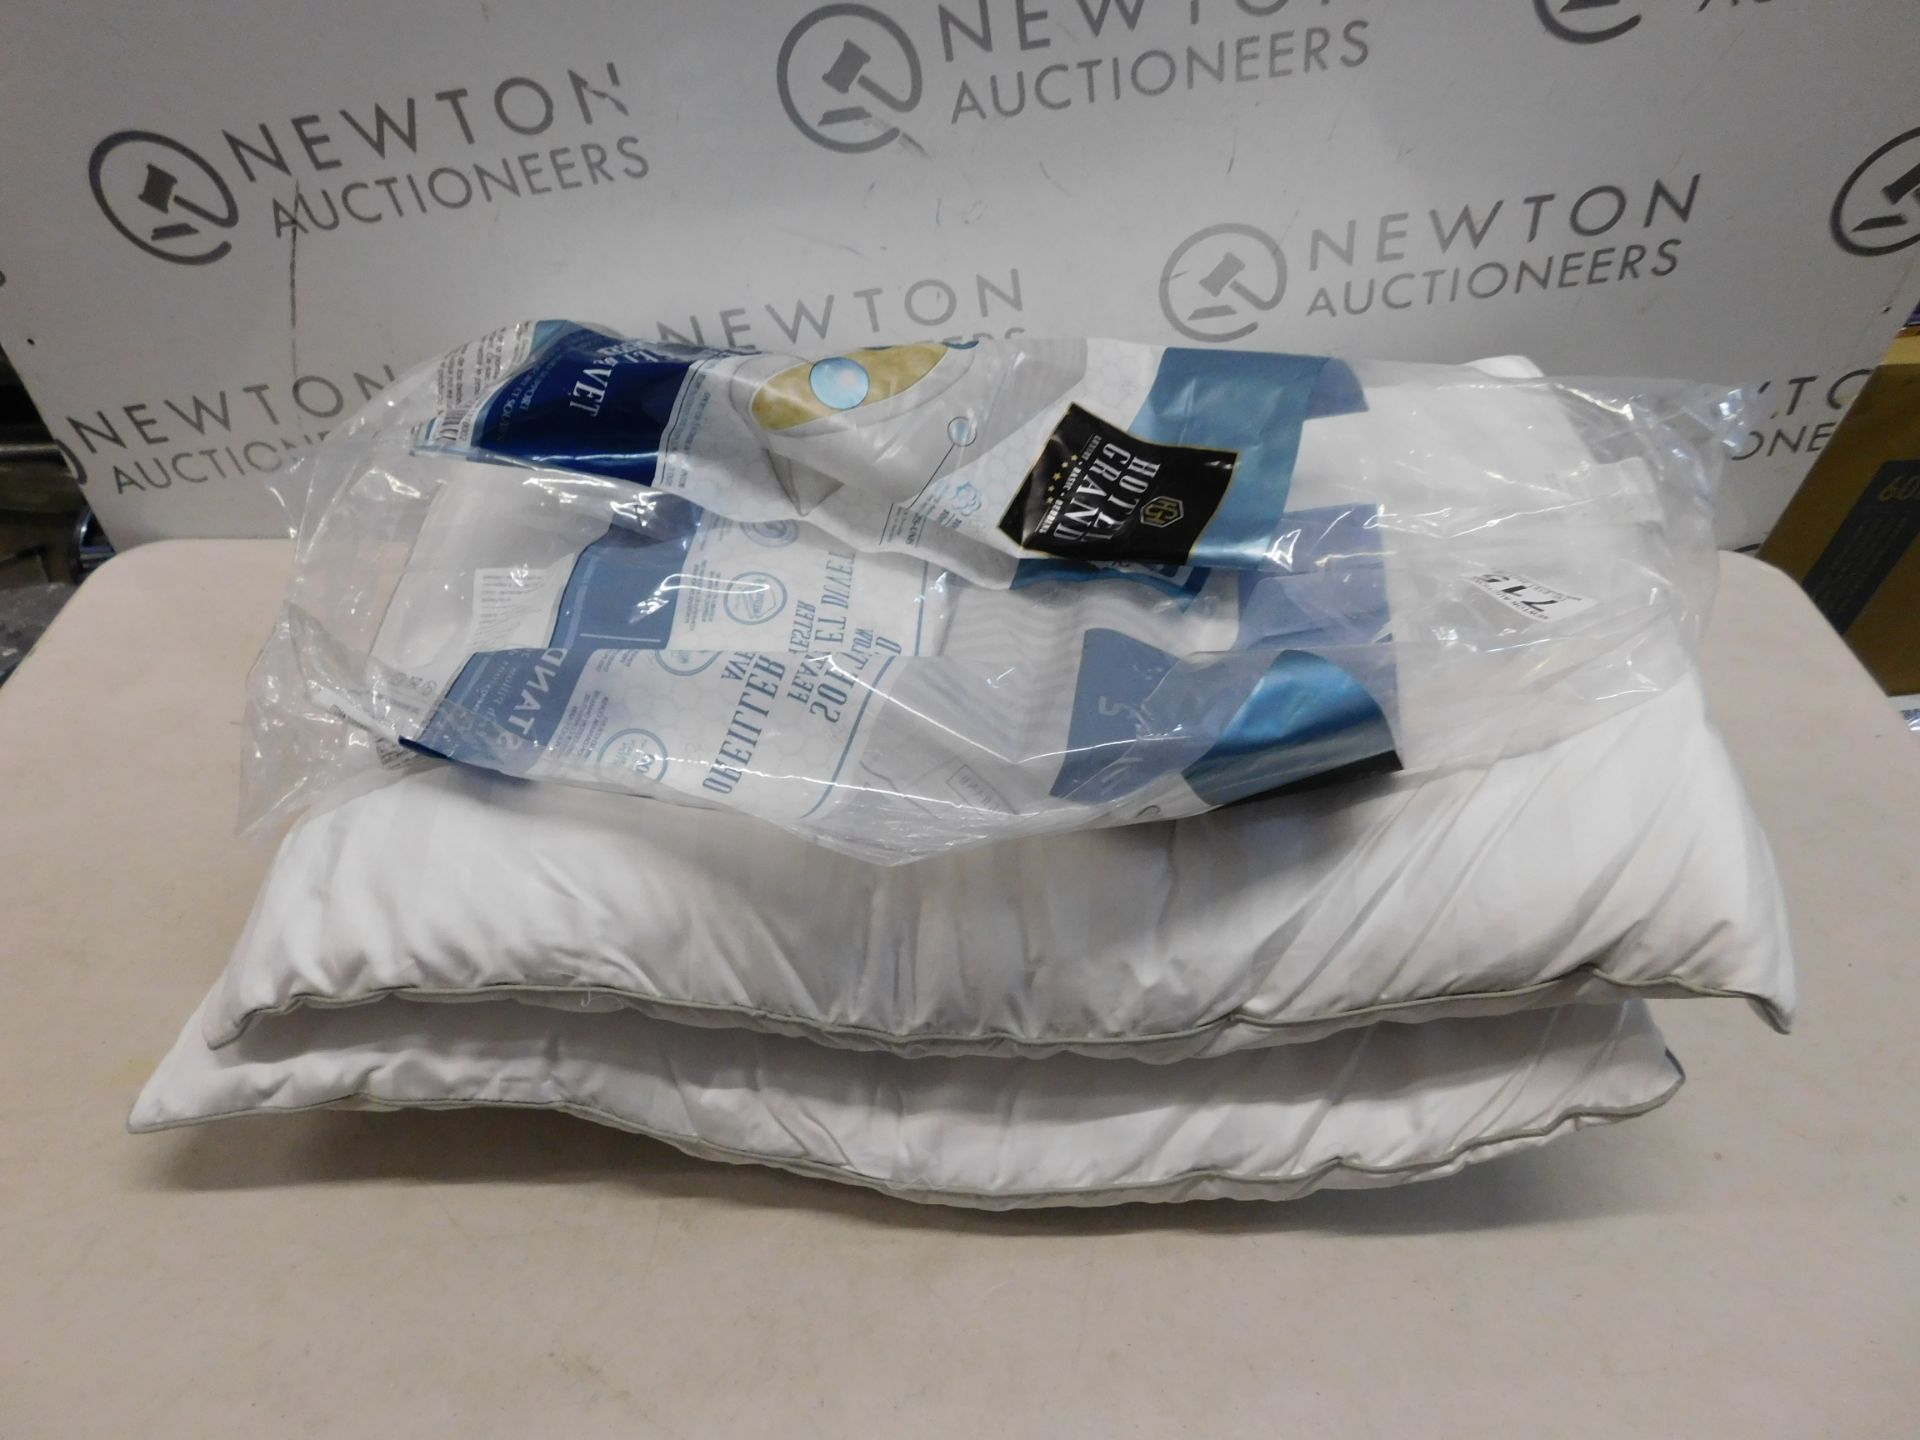 1 BAGGED SET OF 2 HOTEL GRAND DOUBLE TOP GOOSE FEATHER & GOOSE DOWN PILLOWS RRP Â£29.99